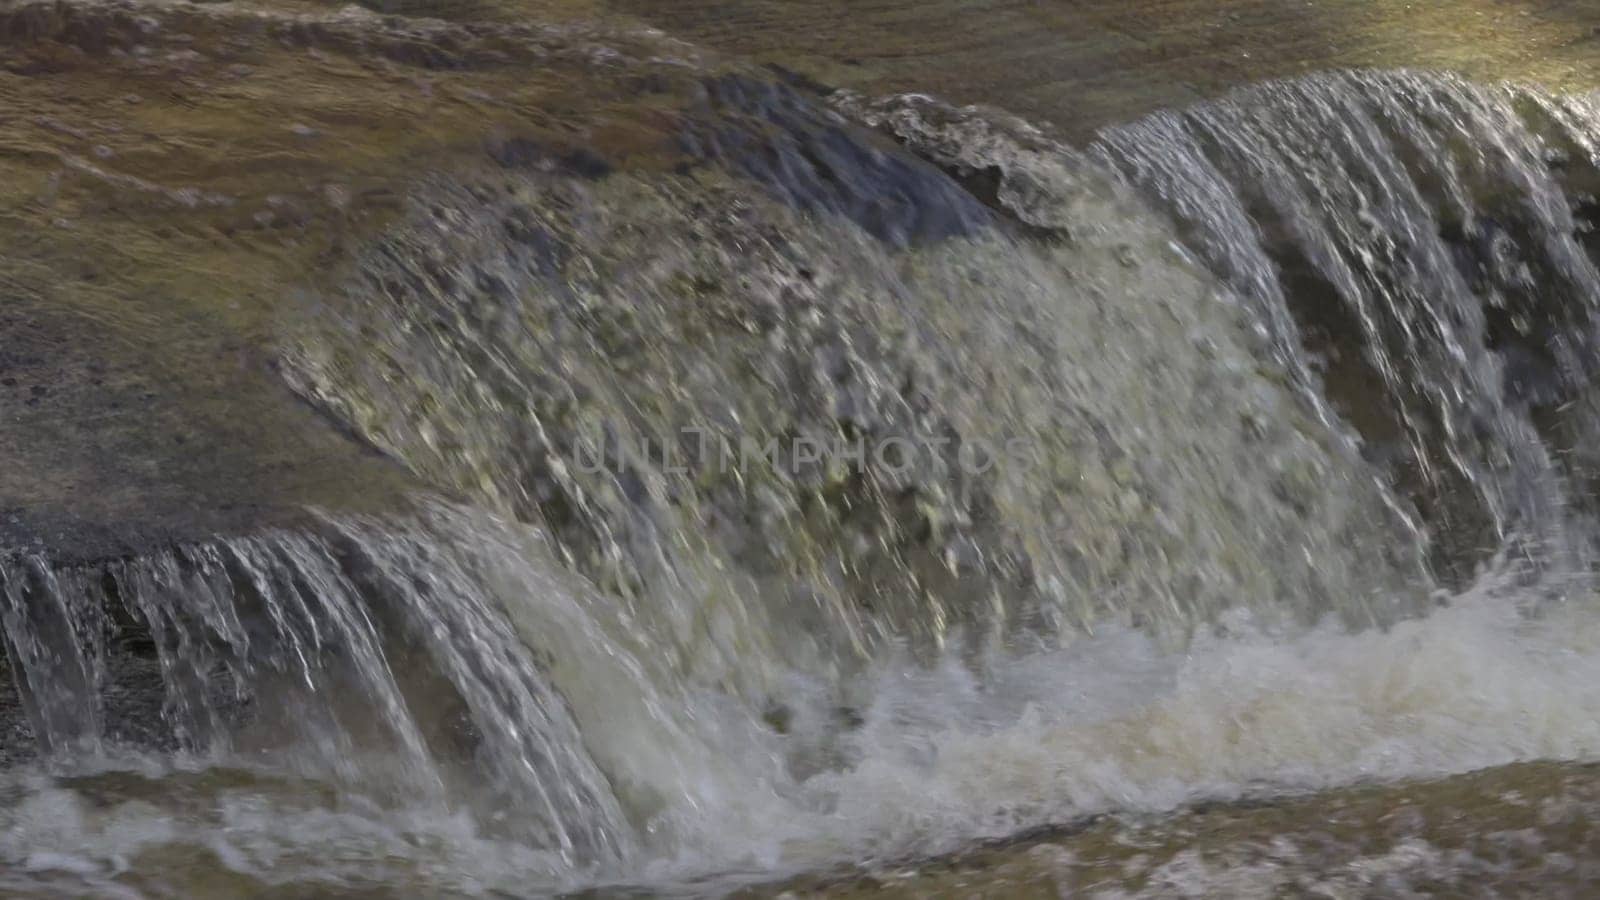 Slow motion video showing clear water flowing over rocks.